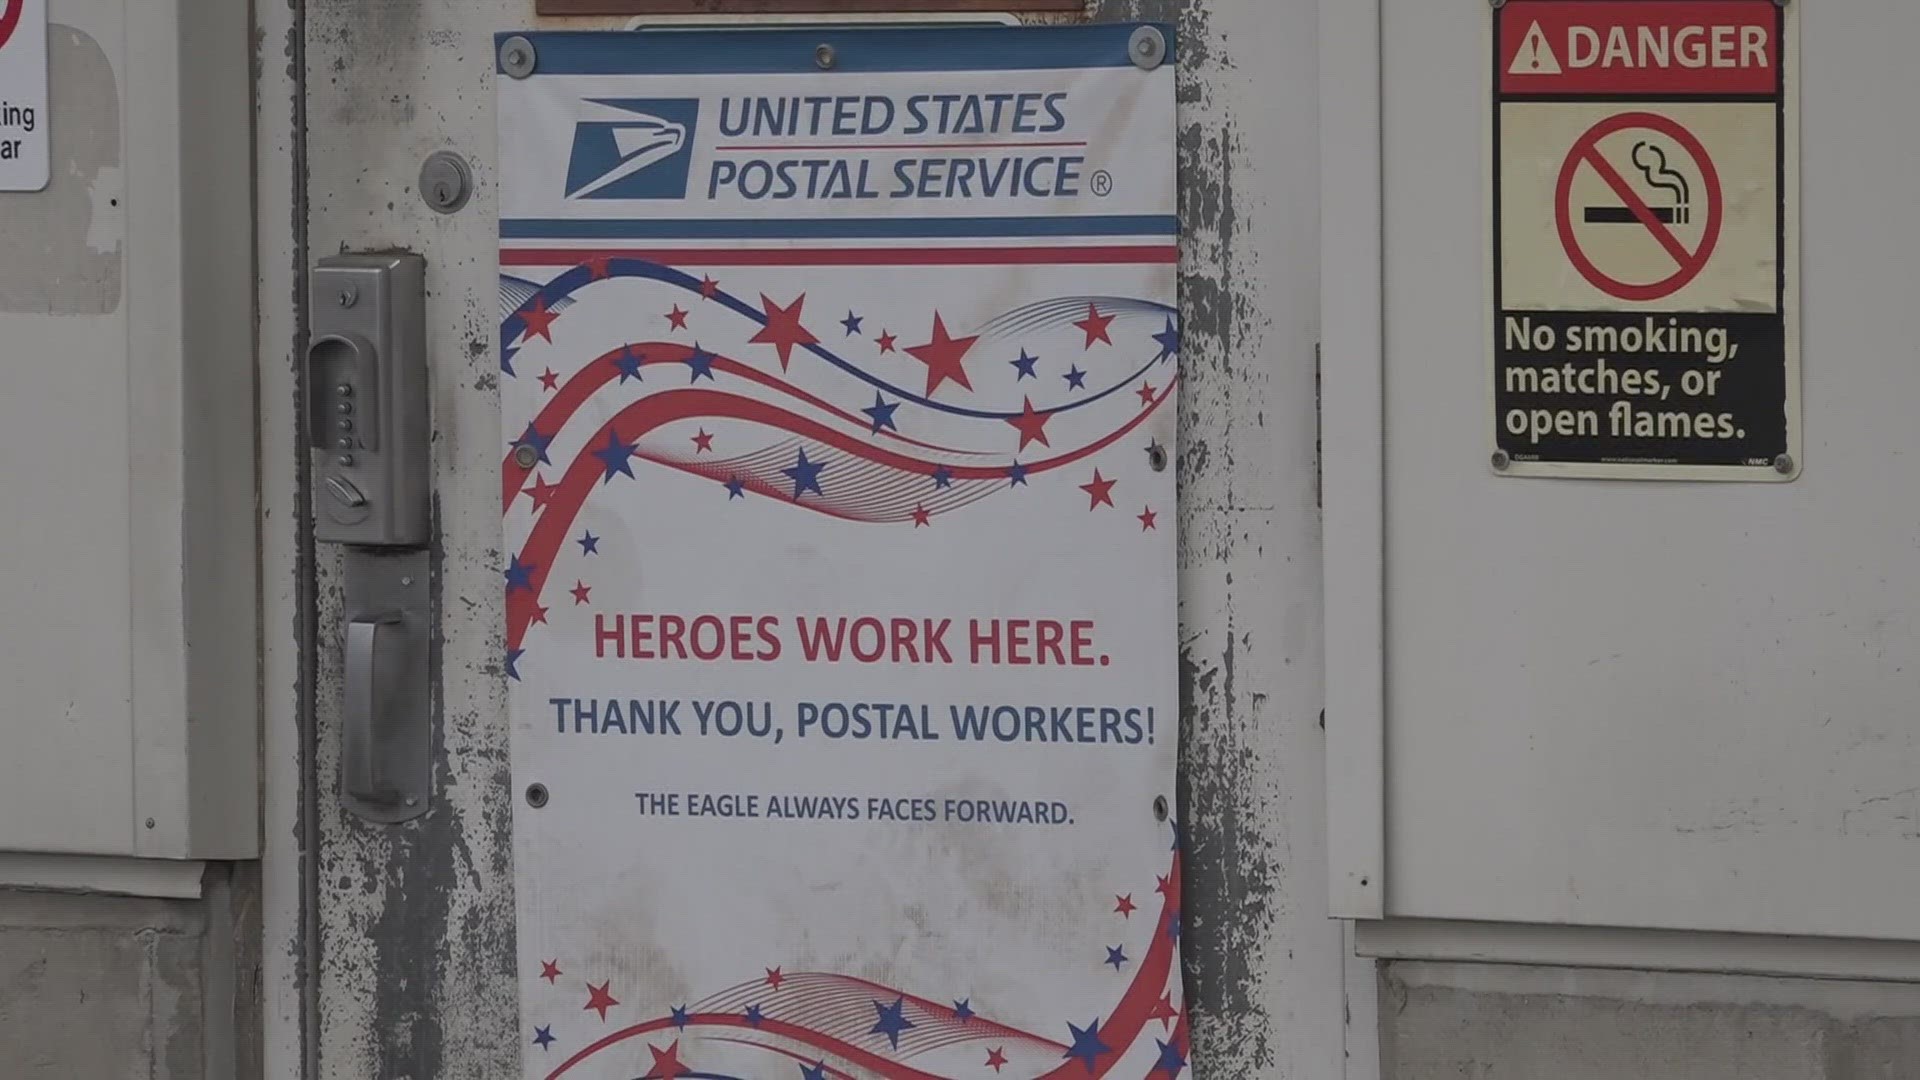 The unions plan to picket ahead of a Feb. 29 meeting where the USPS will seek public input on the Maine part of its Delivering for America plan.